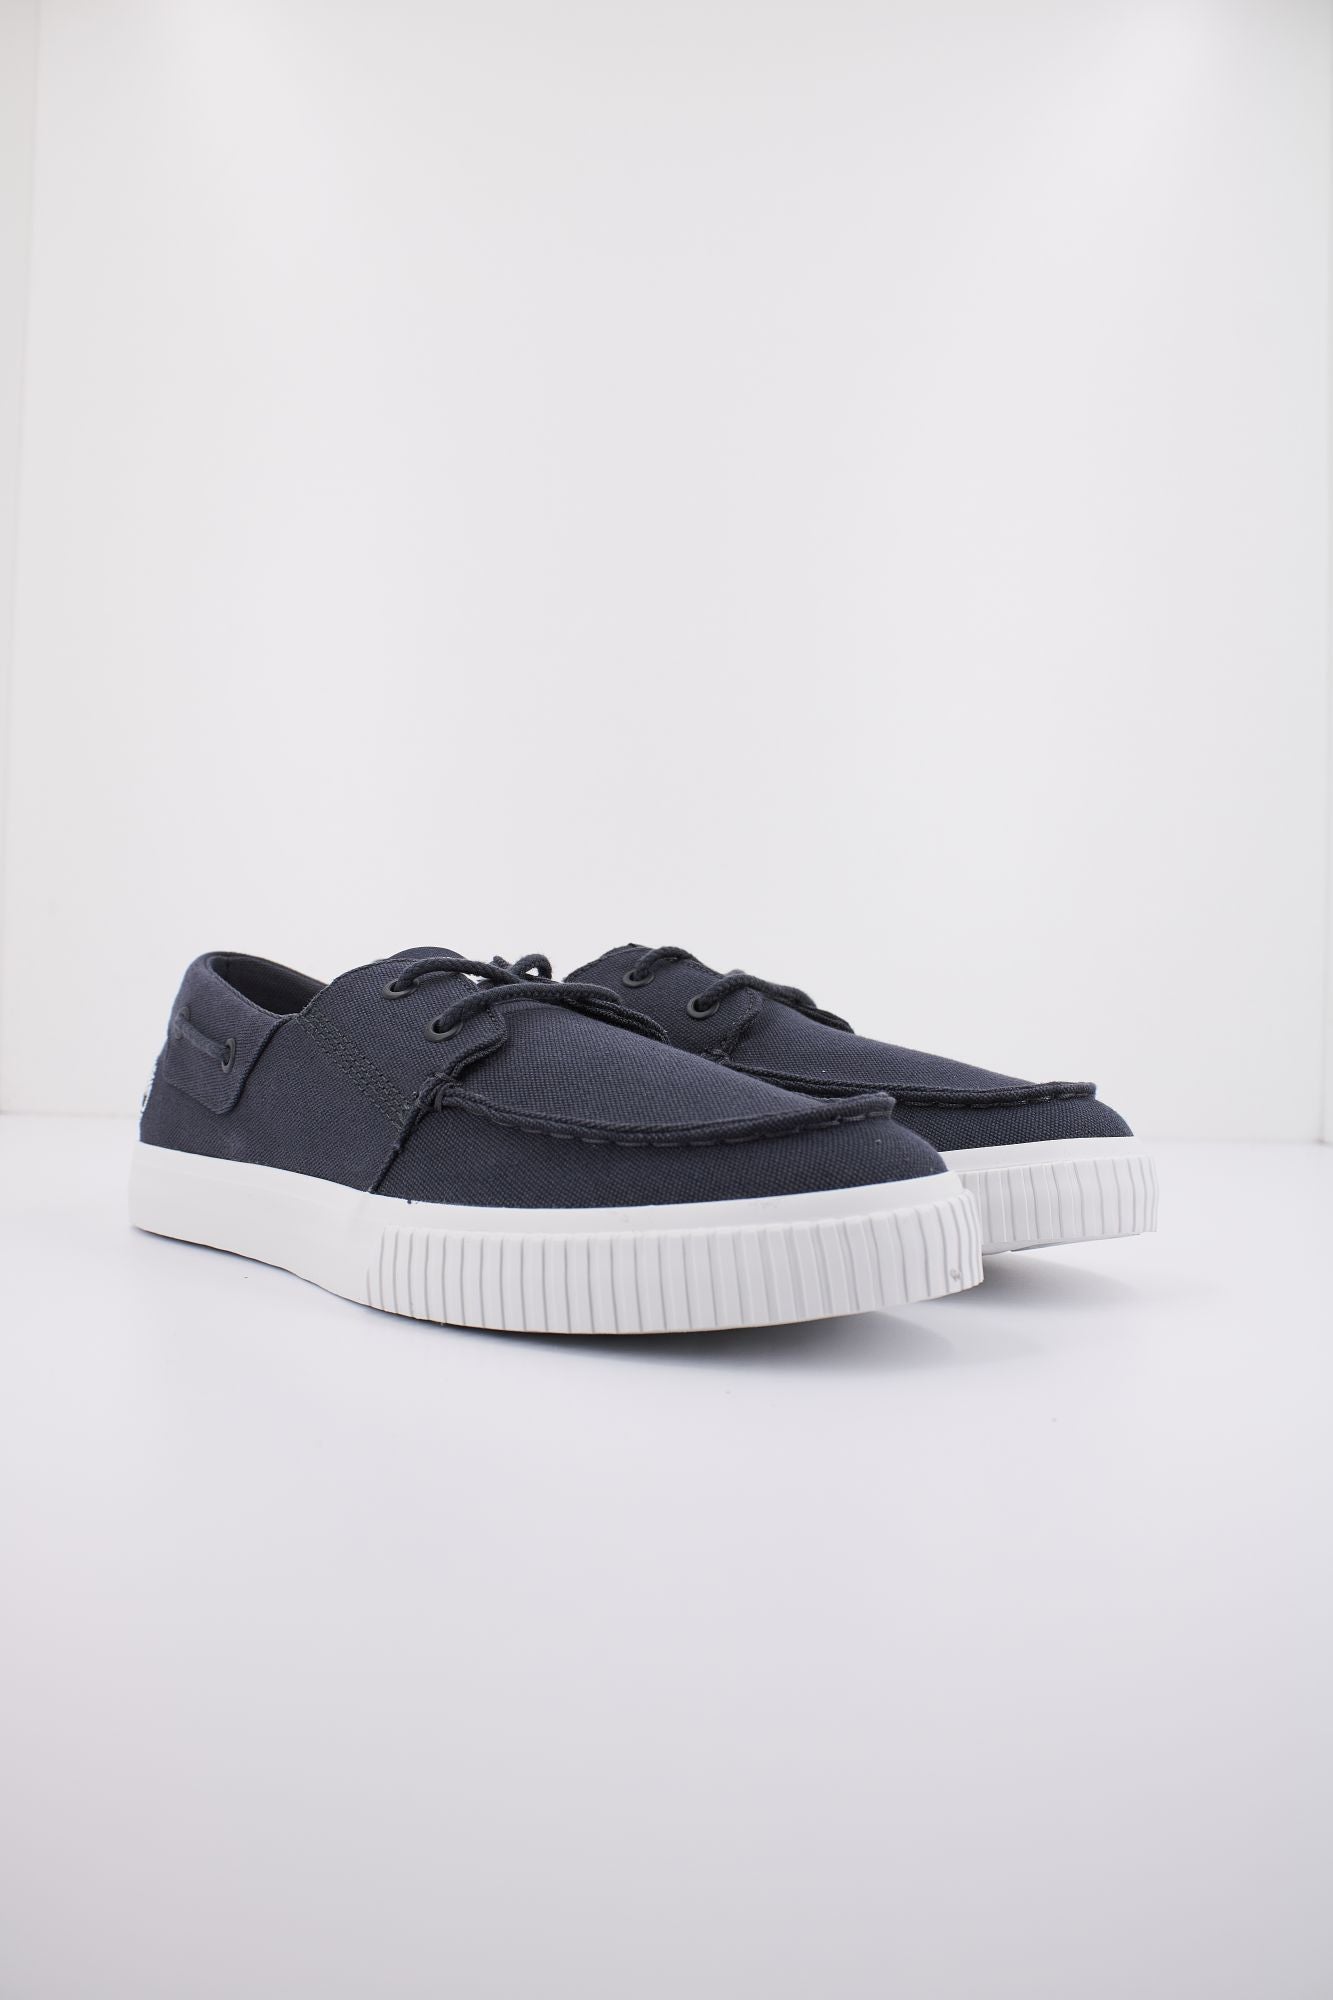 TIMBERLAND MYLO LOW LACE UP en color AZUL (2)